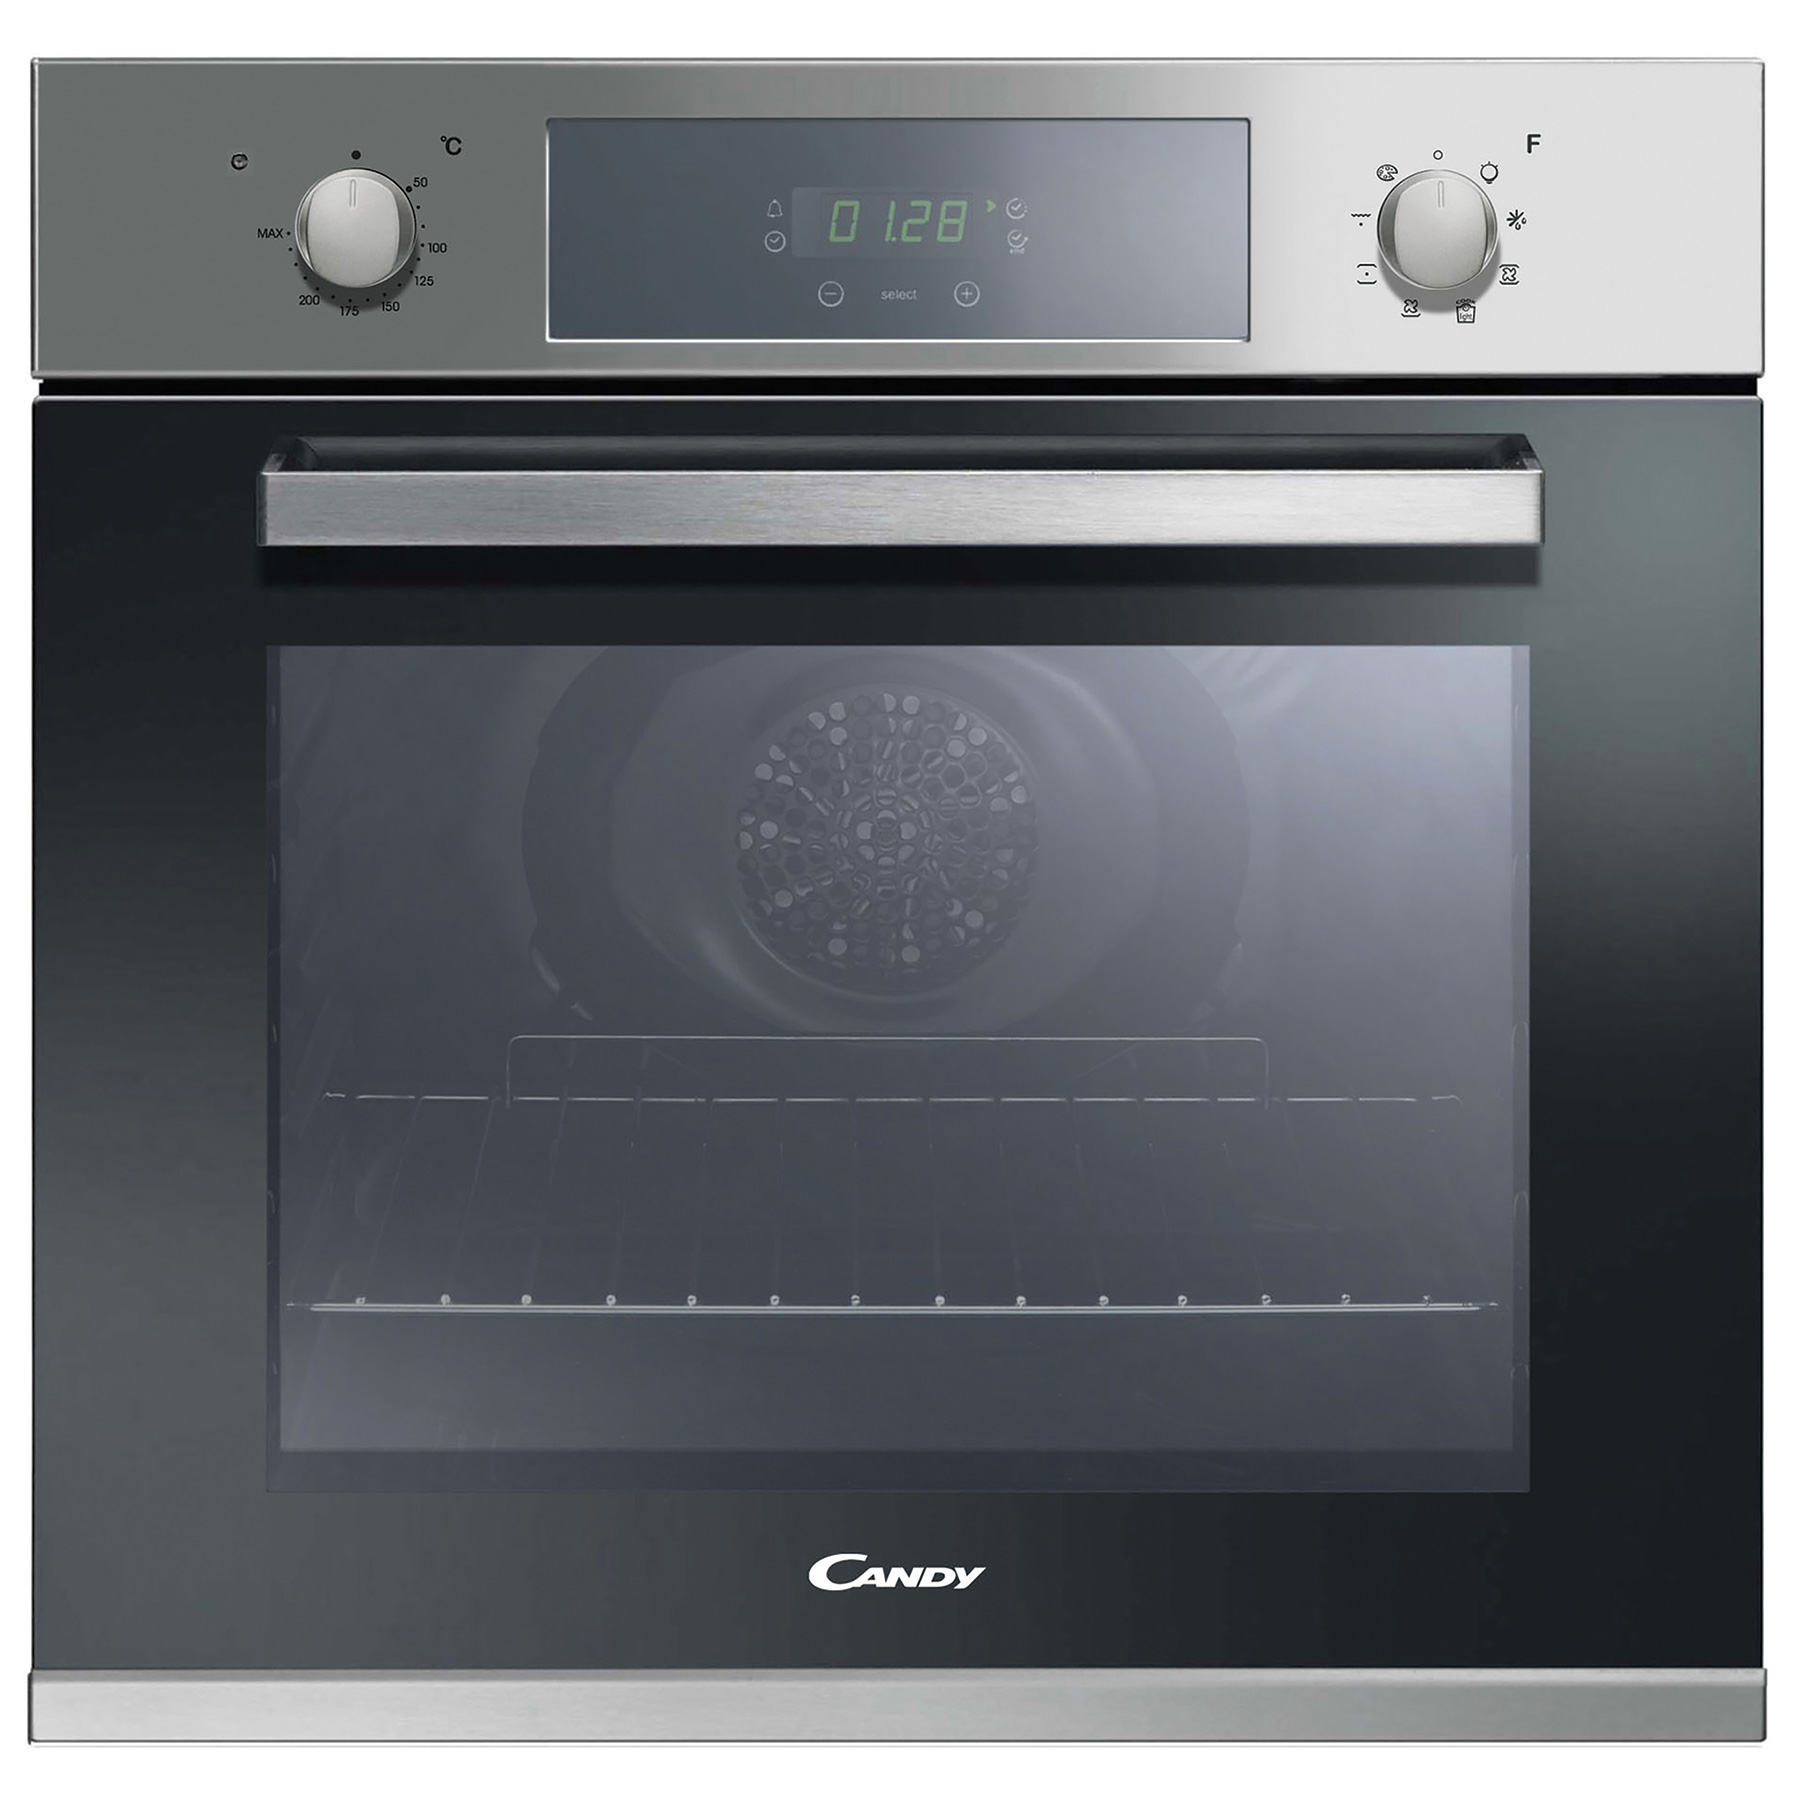 Candy FCP605XE Built In Electric Single Oven in St Steel 65L A Rated